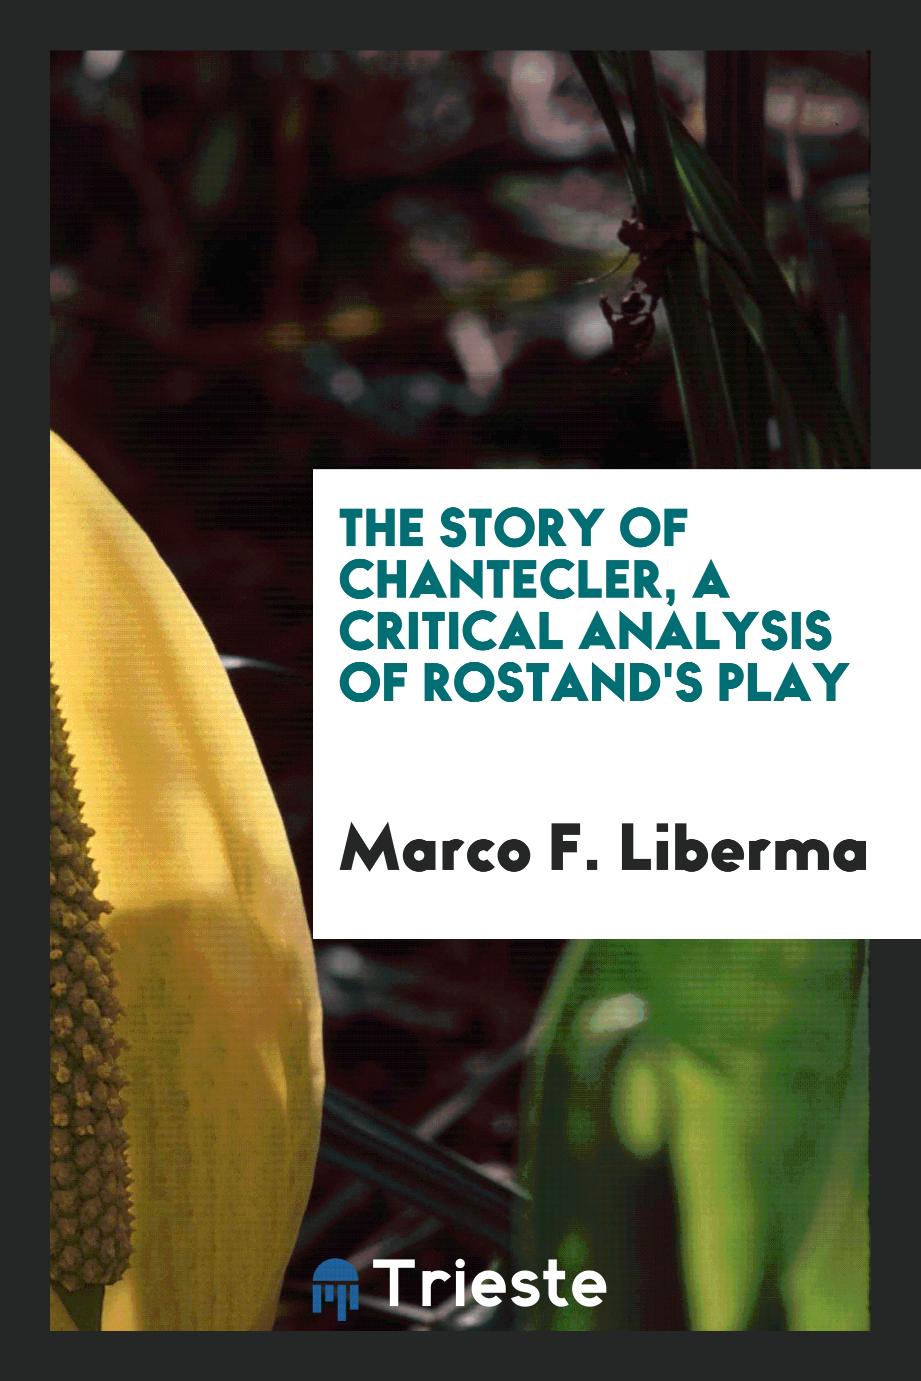 The Story of Chantecler, a Critical Analysis of Rostand's Play